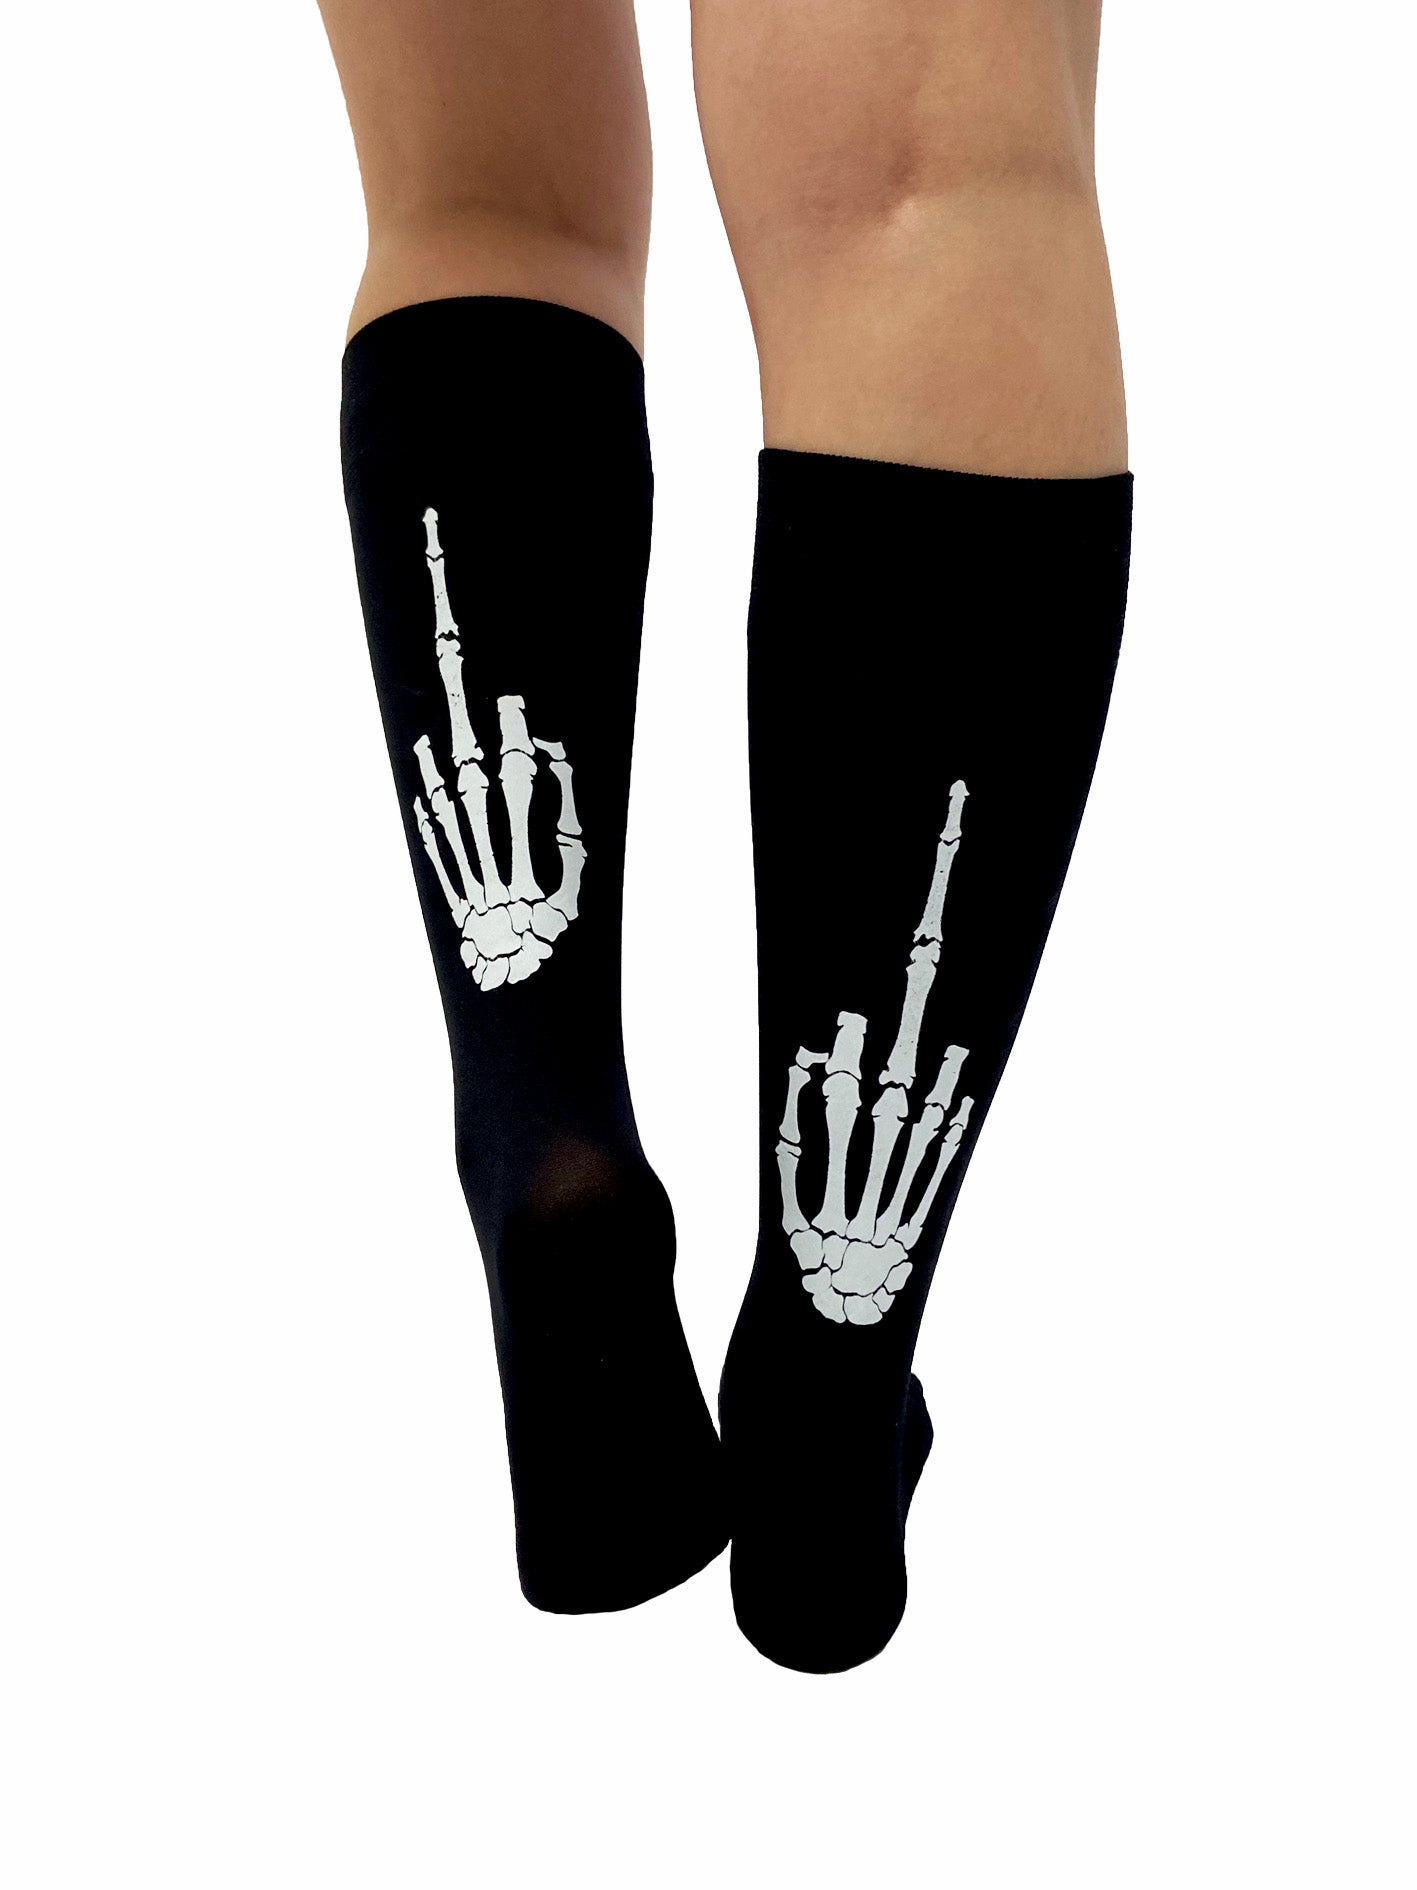 Wholesale Alternative Stockings and Accessories